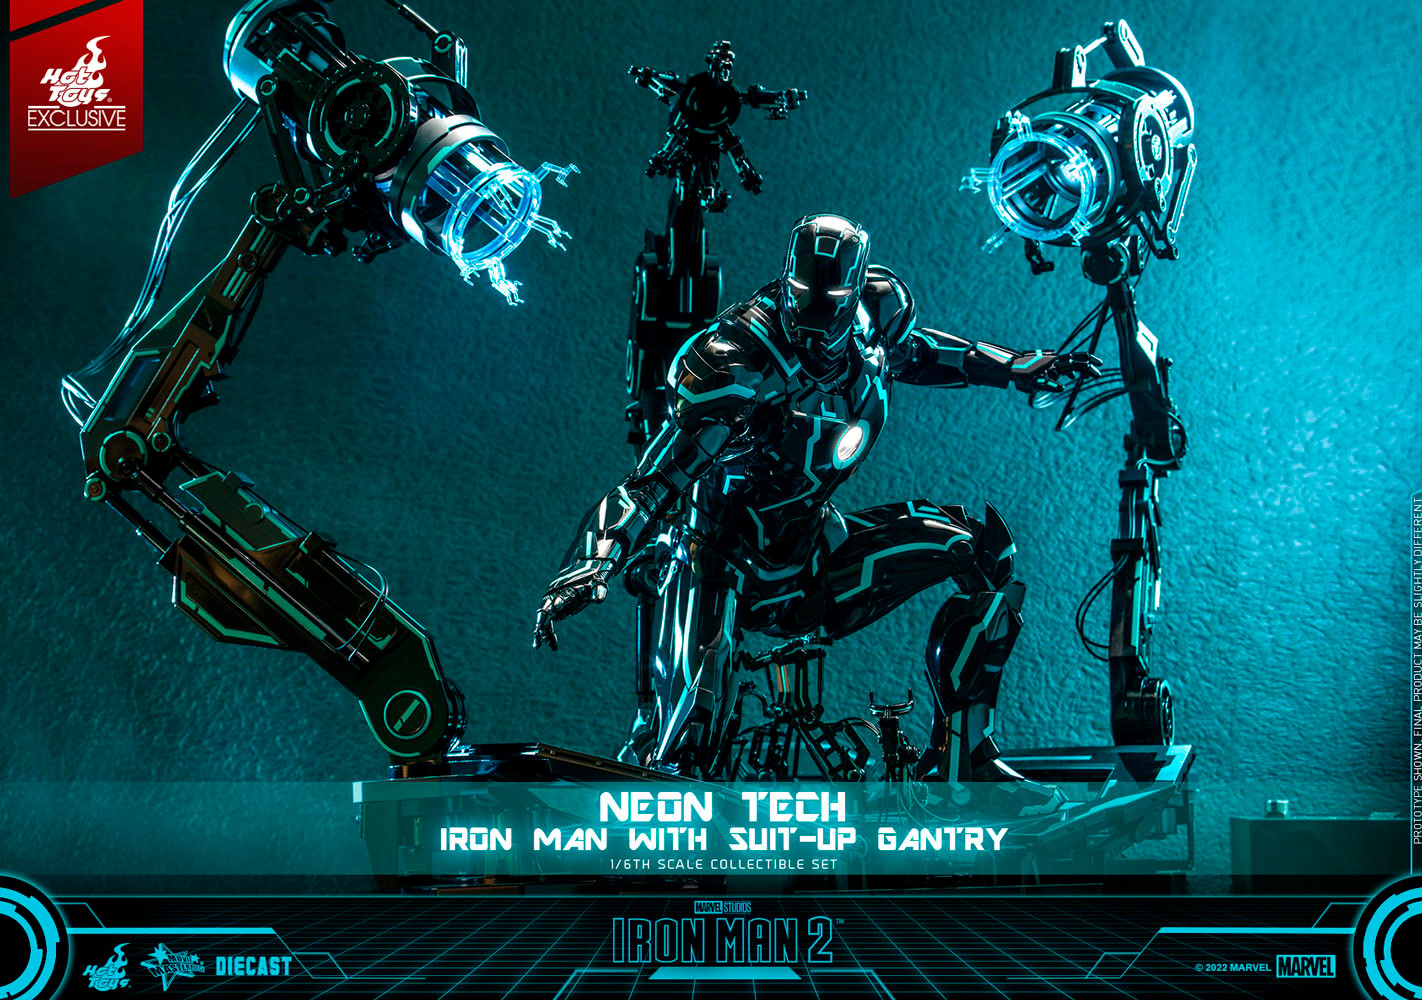 Neon Tech Iron Man with Suit-Up Gantry (Prototype Shown) View 10